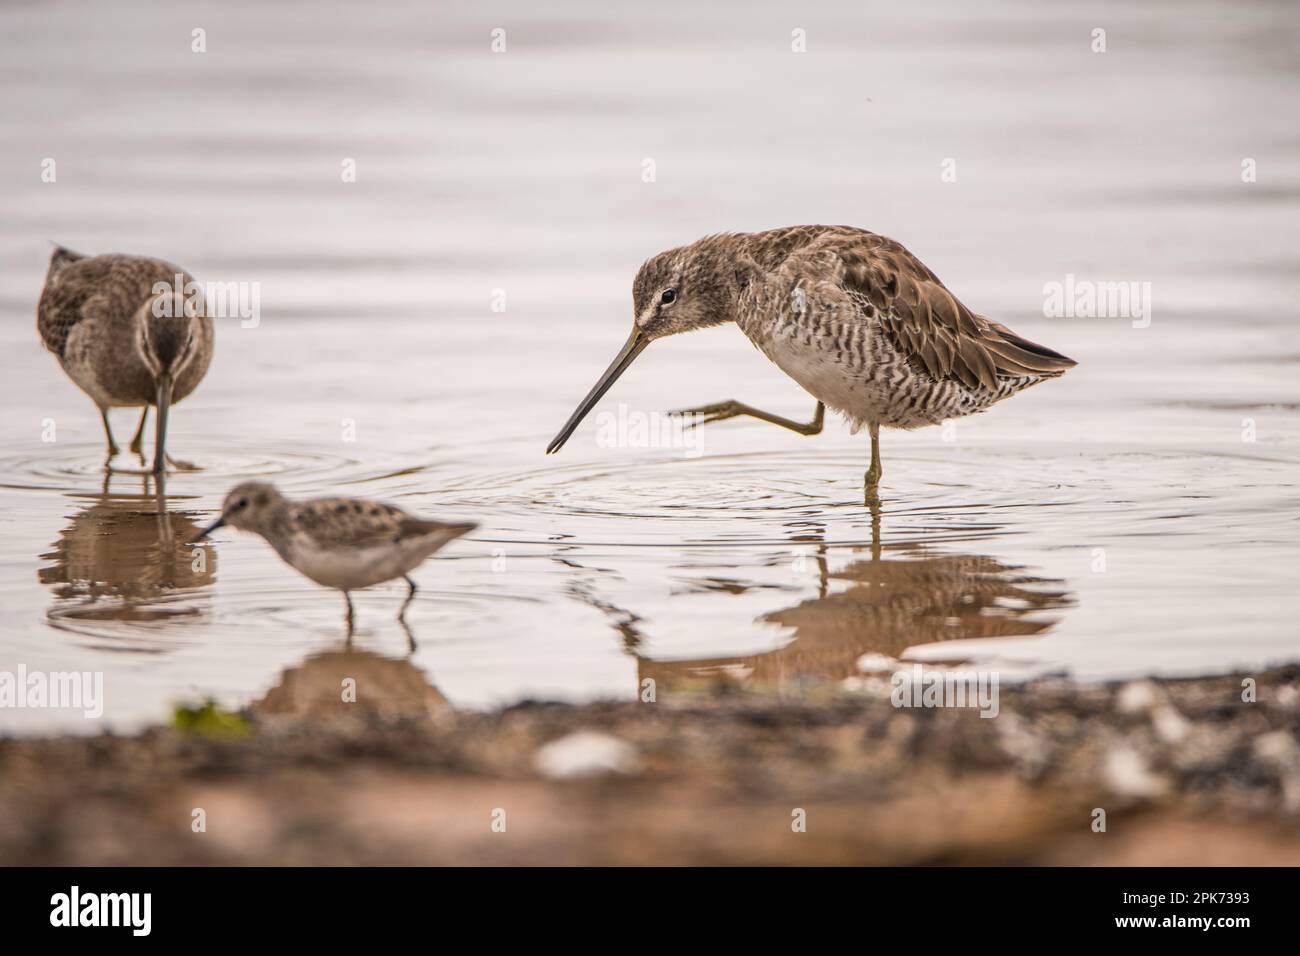 Long-billed dowitchers wading in shallow water of a wetland marsh at the Riparian Reserve at Water Ranch, Gilbert, Arizona, USA Stock Photo